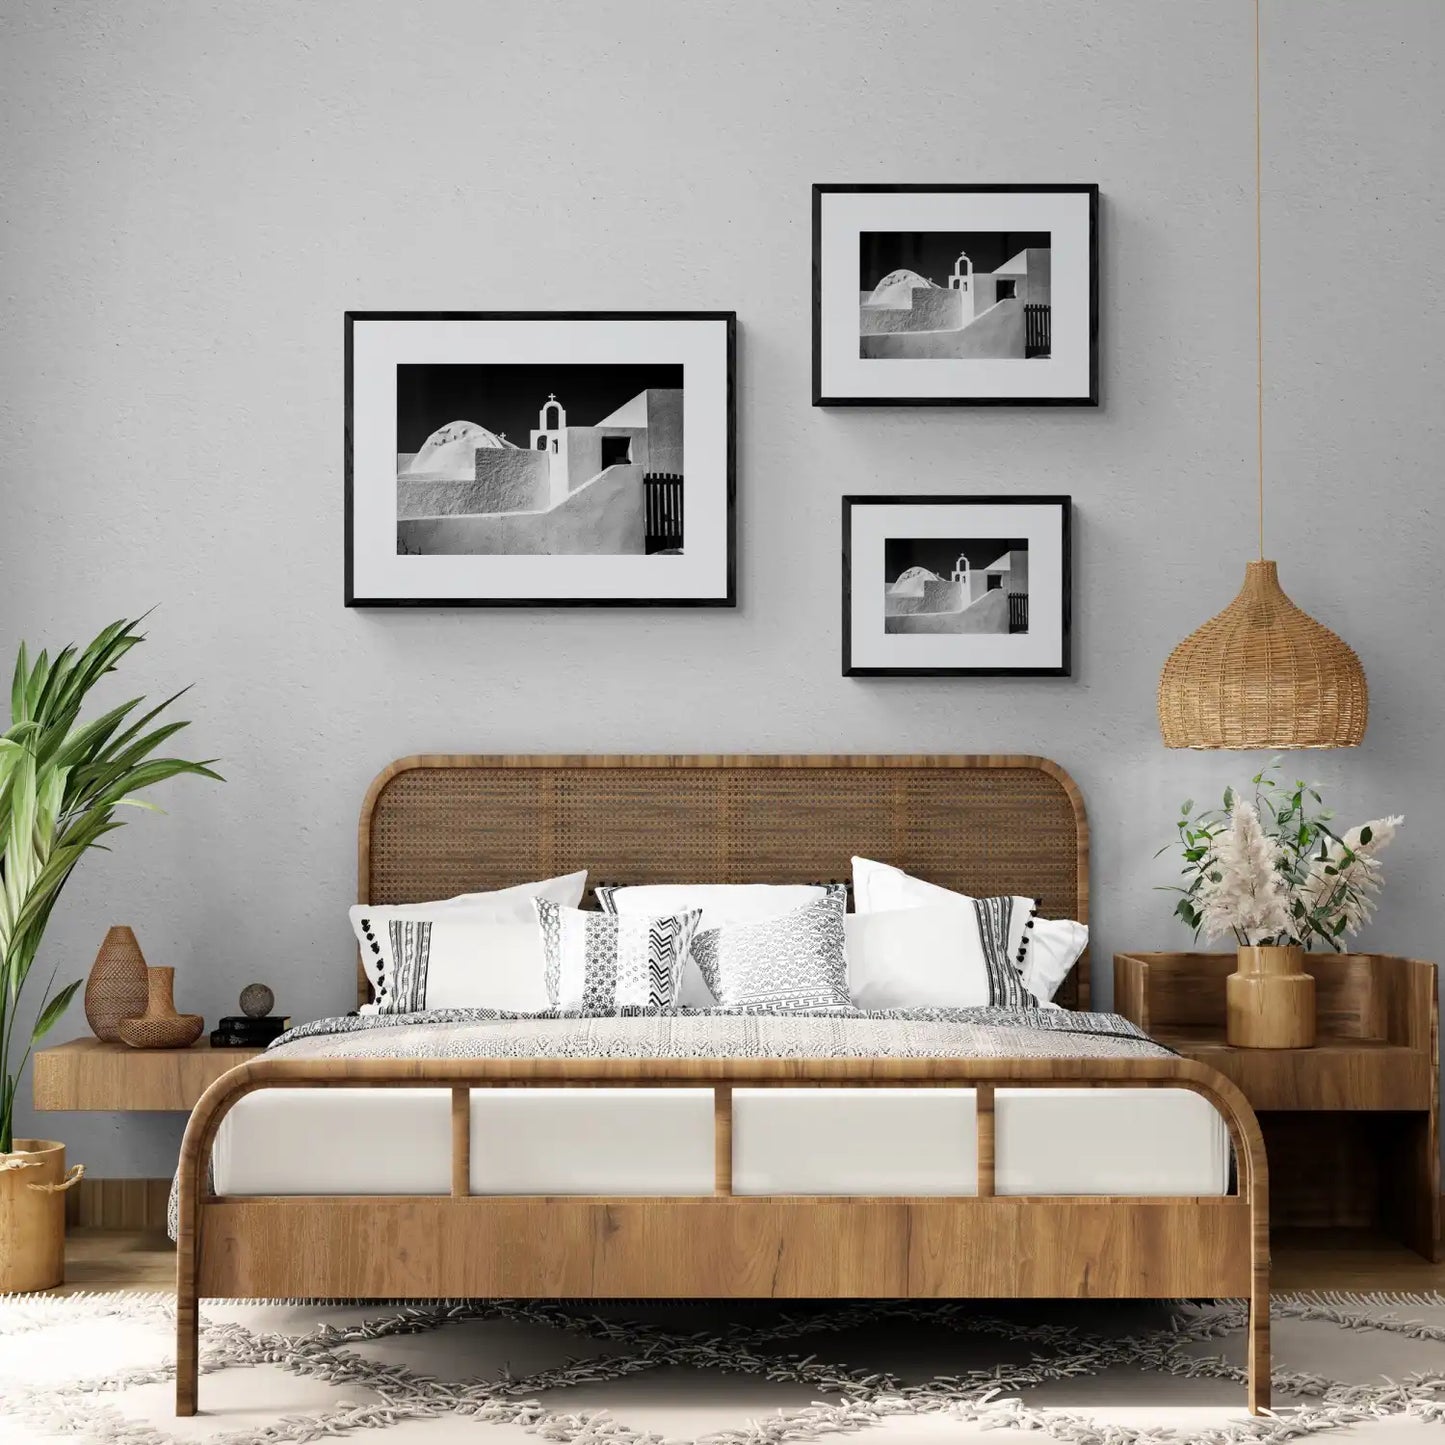 Architectural Forms | Santorini | Chorōs | Black-and-white wall art photography from Greece - framing options